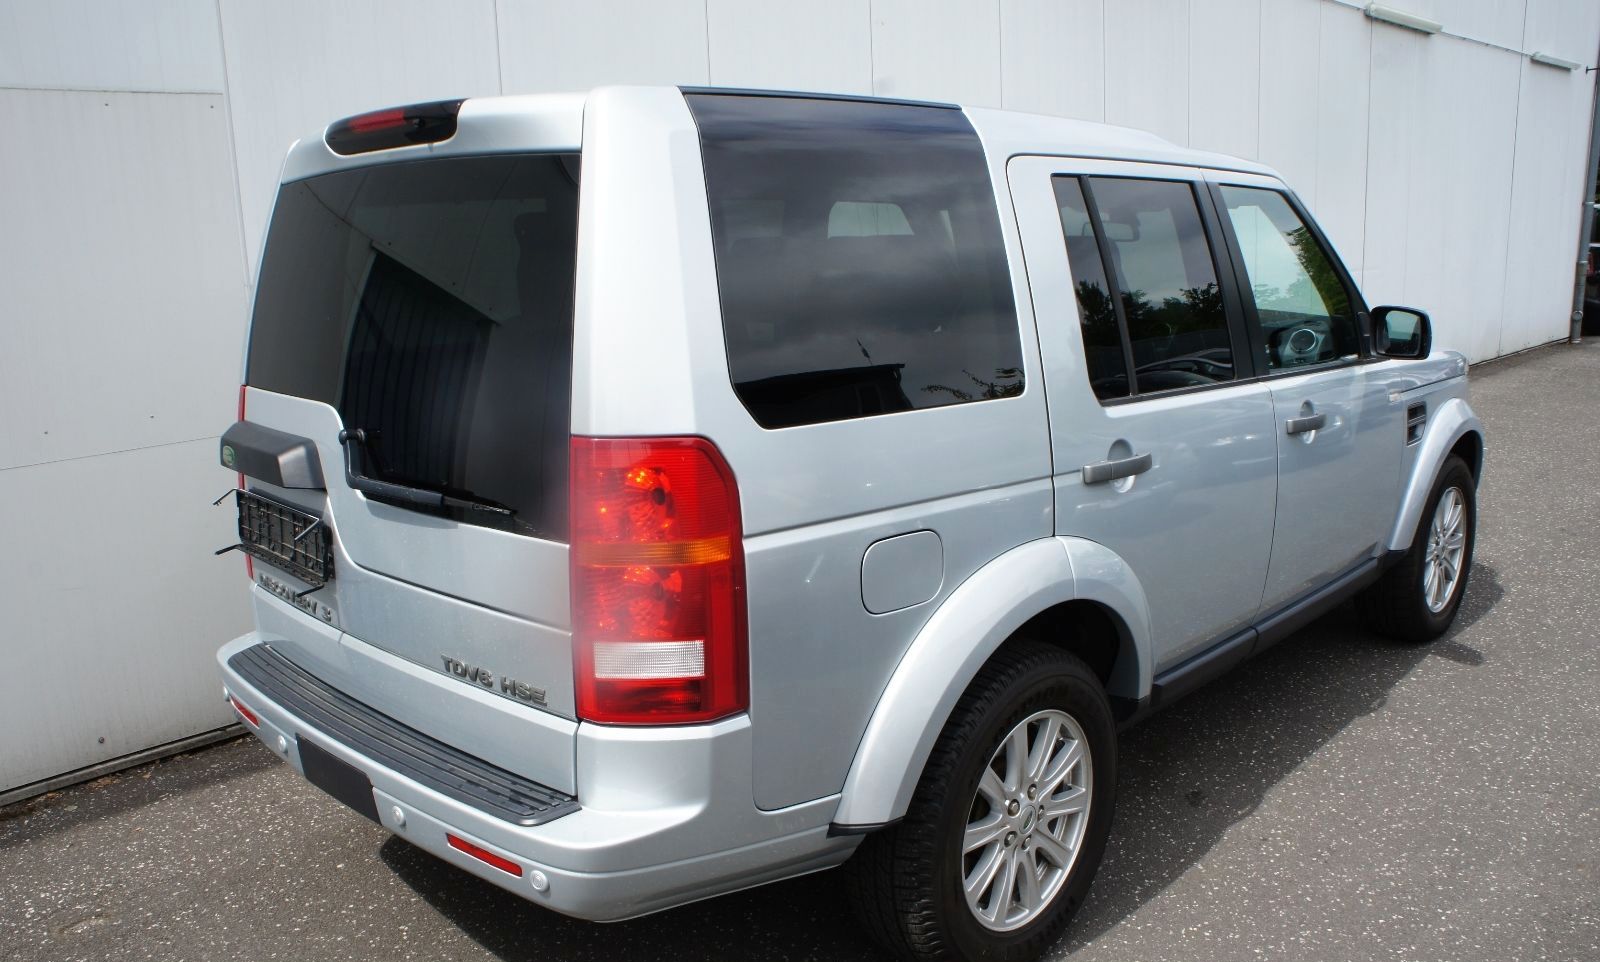 LANDROVER DISCOVERY (01/04/2009) - 